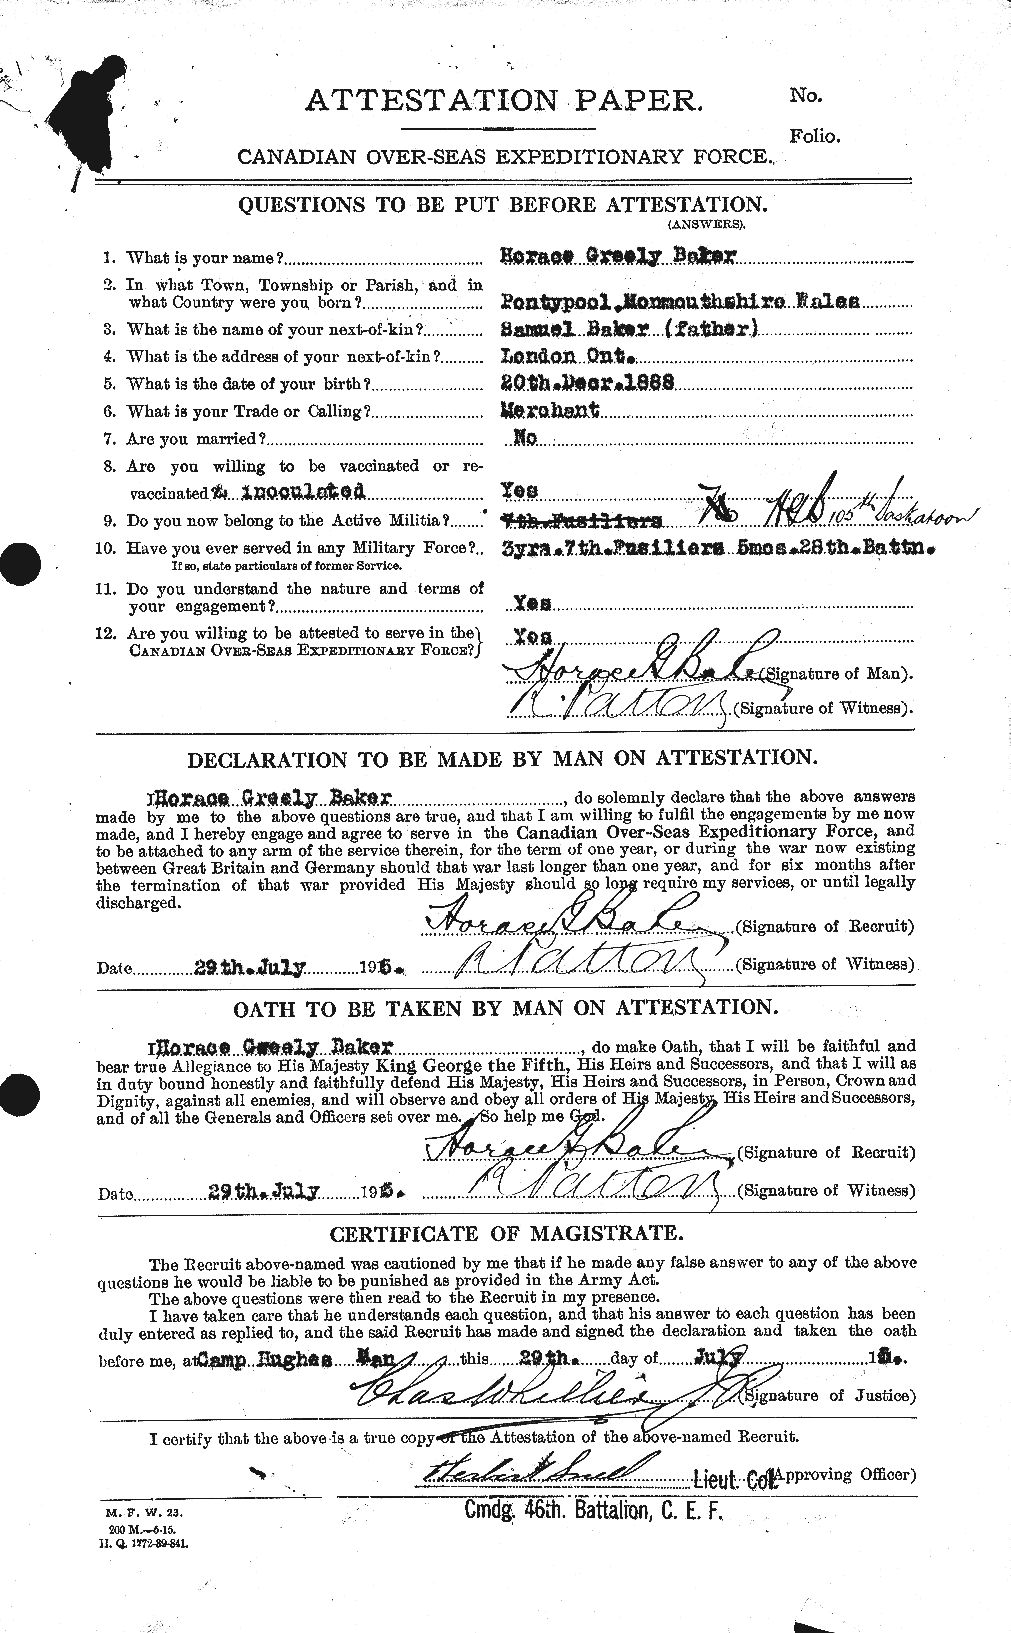 Personnel Records of the First World War - CEF 216102a